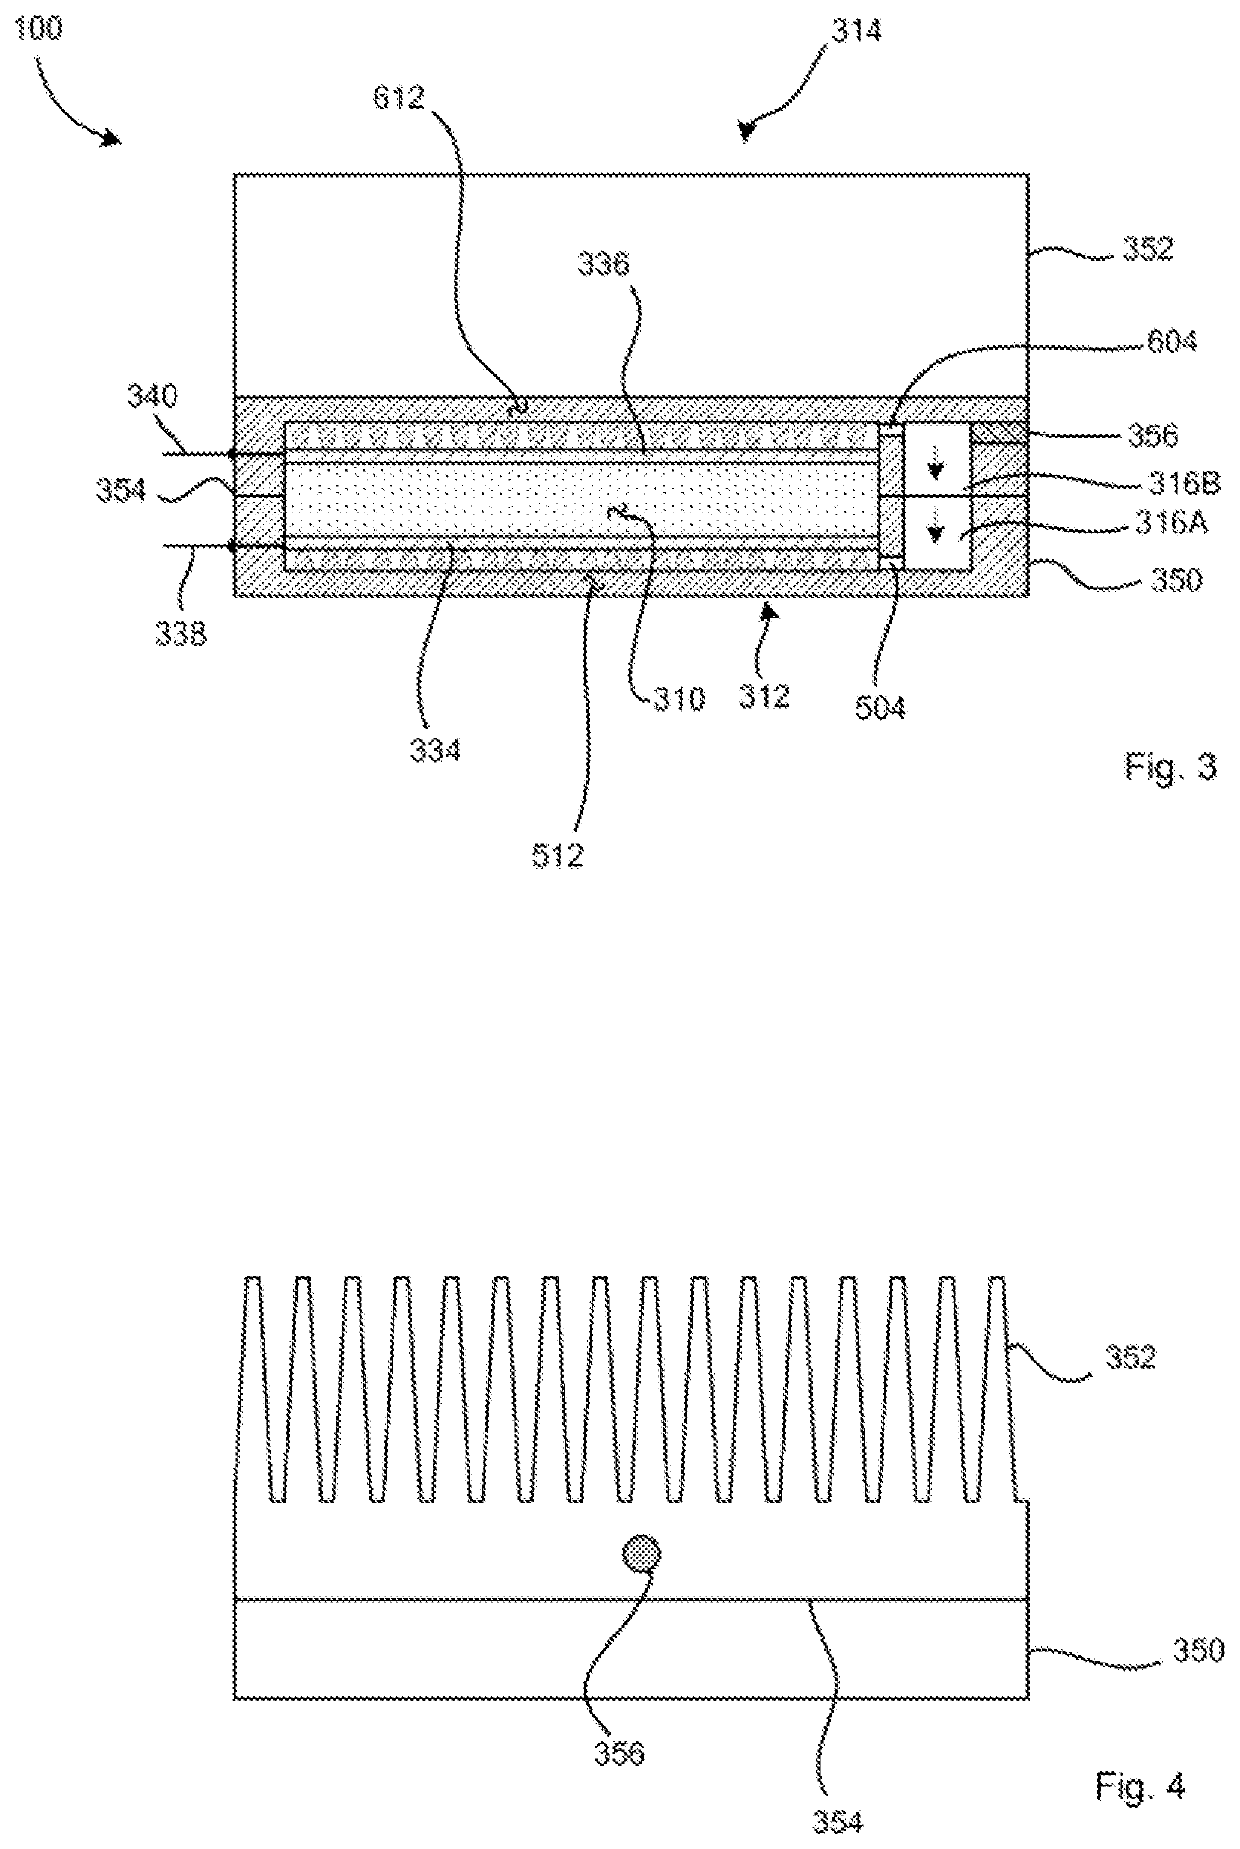 Advanced system for electrochemical cell